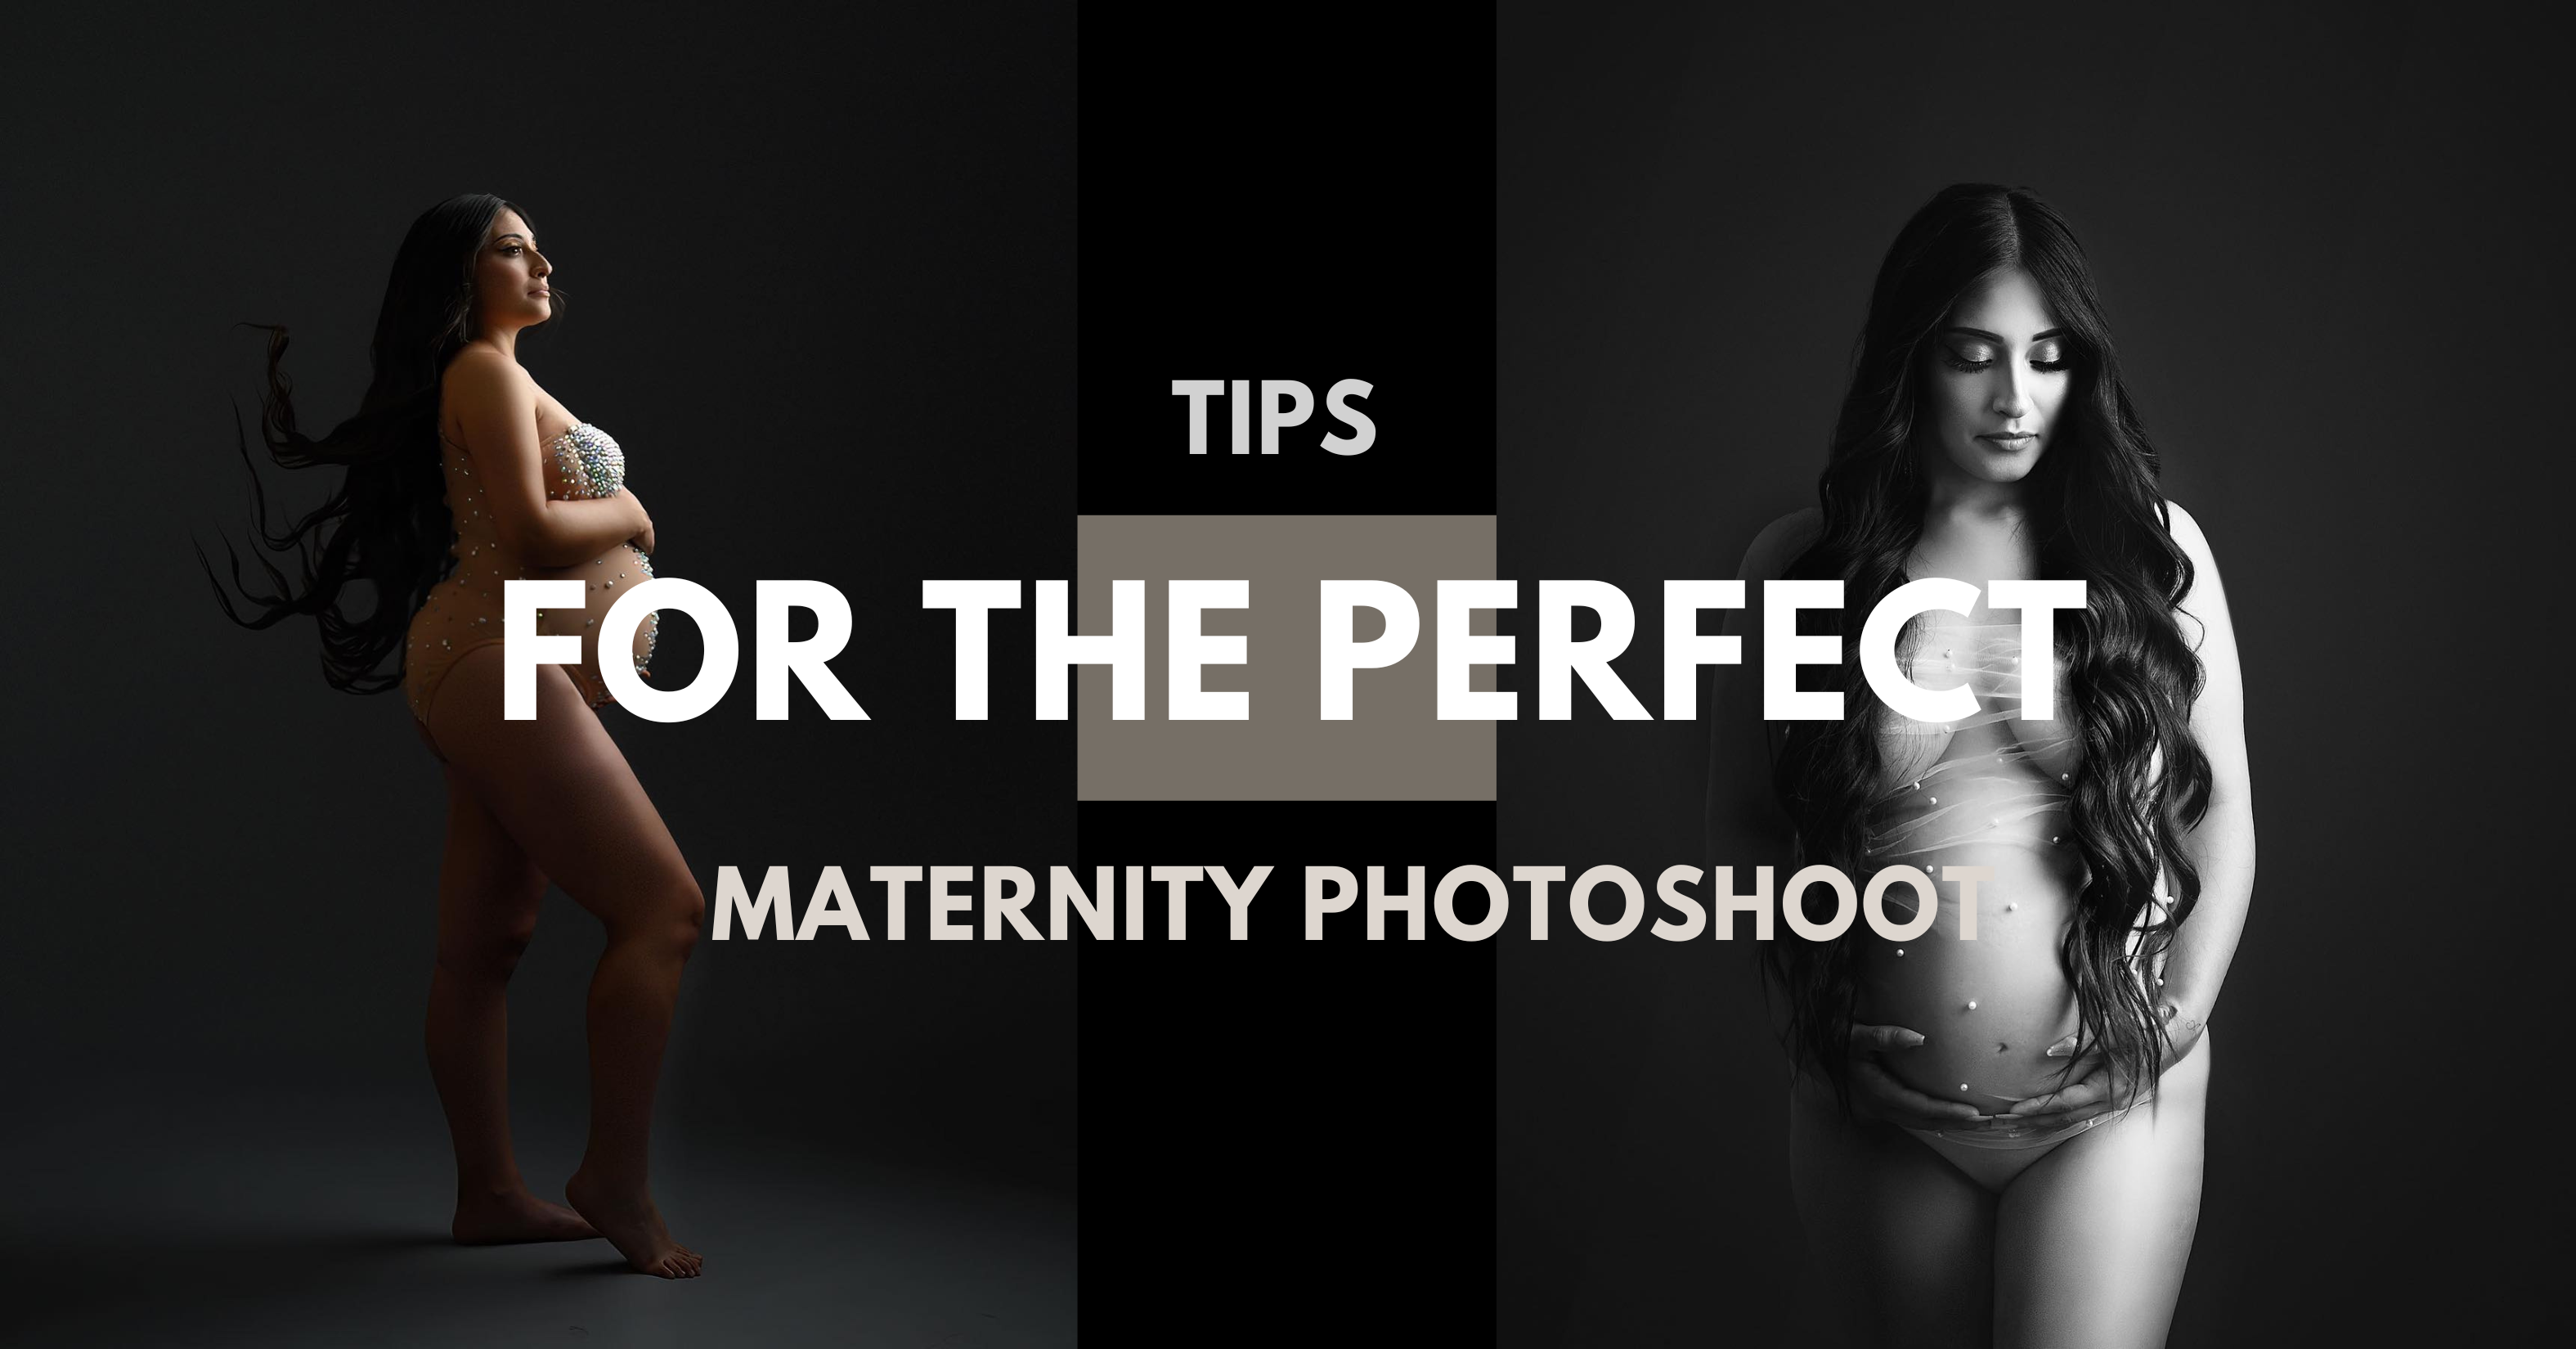 Tips for the perfect maternity photoshoot